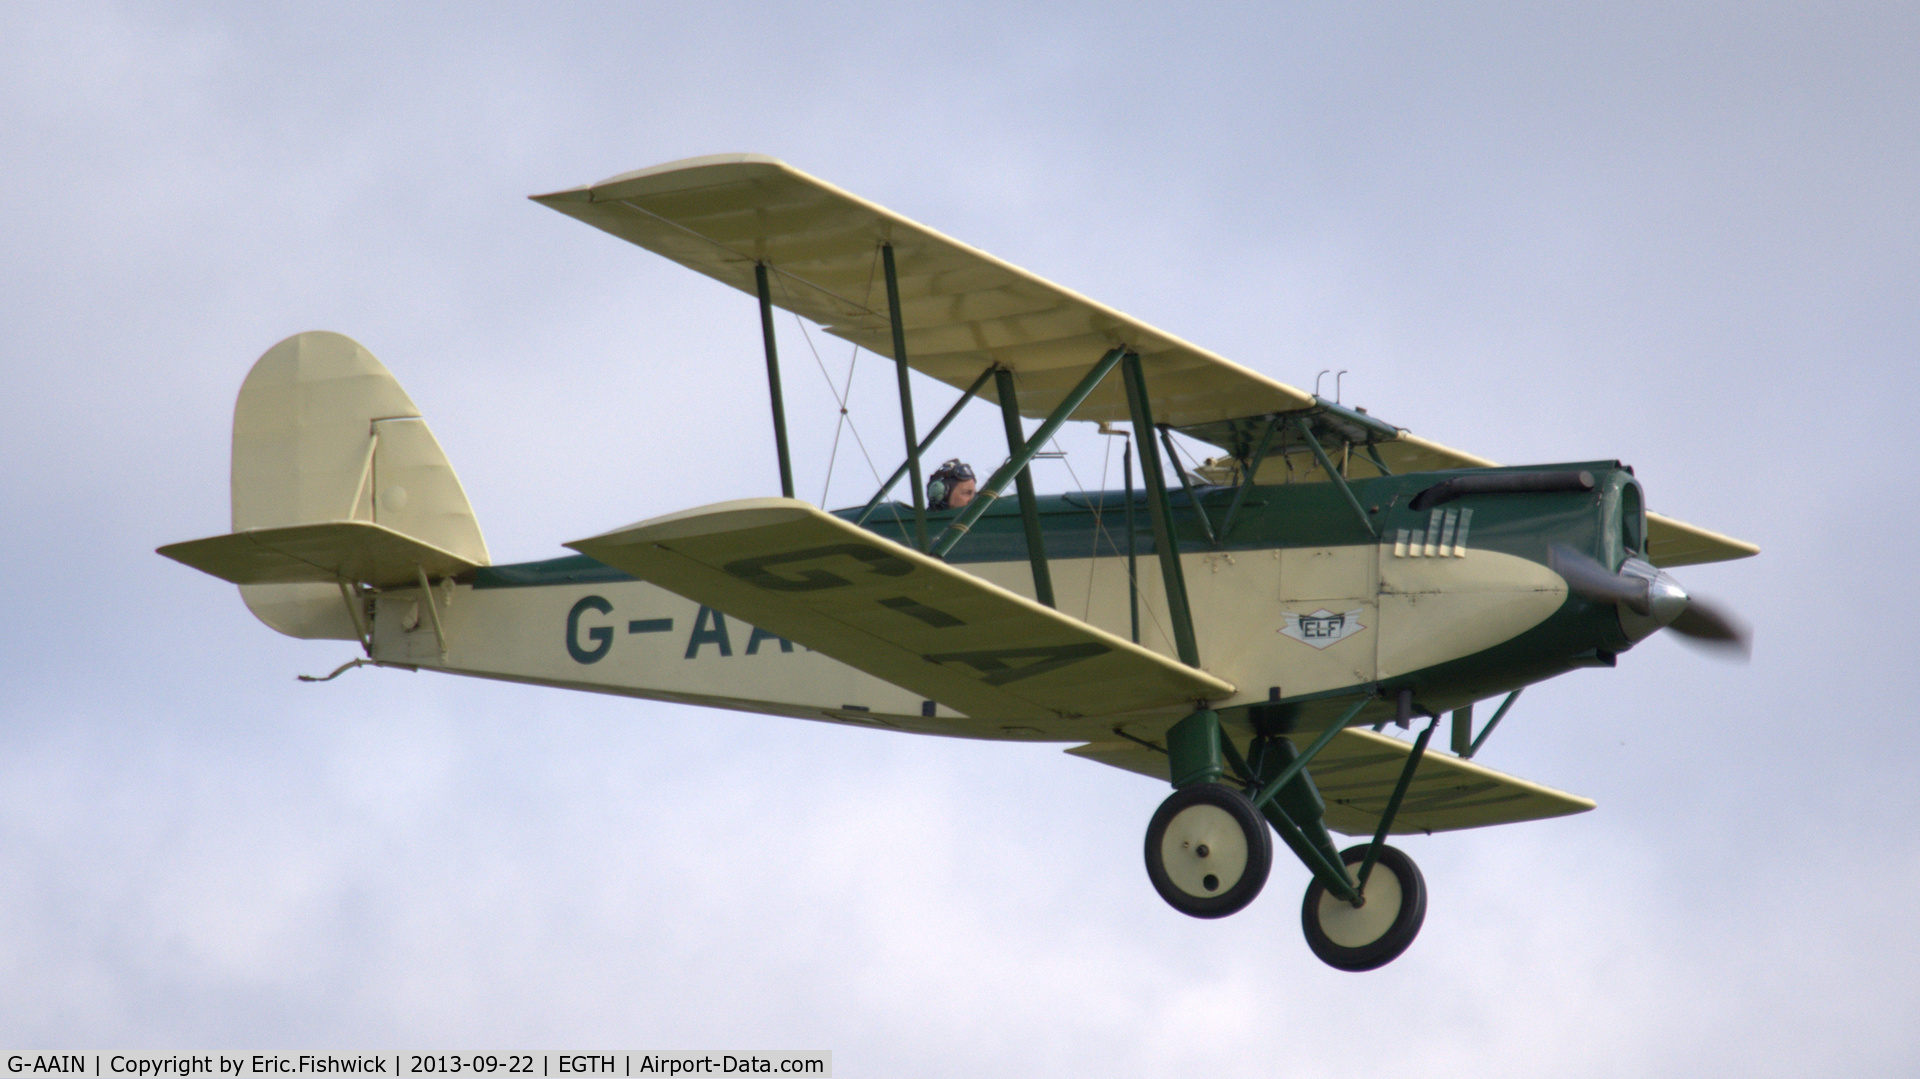 G-AAIN, 1934 Parnall Elf II C/N J.6, 42. G-AAIN at the Shuttleworth Uncovered Air Display, Sept. 2013